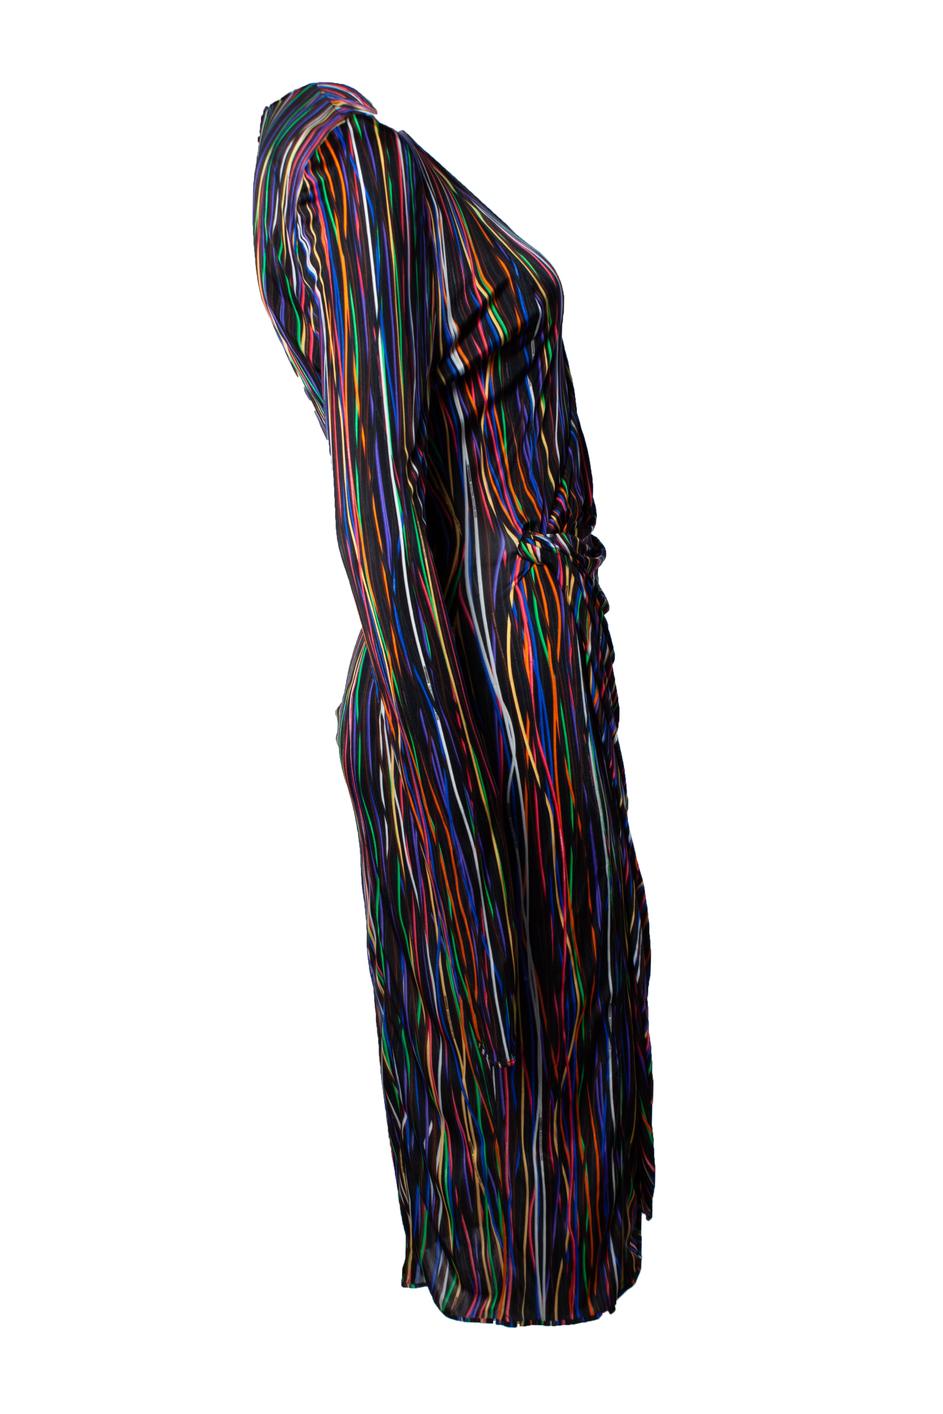 Vetements, Dynasty wire wrap dress in multicolour. The item is in very good condition.

• CONDITION: very good condition 

• SIZE: S 

• MEASUREMENTS: length 113 cm, width 43 cm, waist 32 cm, shoulder width 43 cm, sleeve length 70 cm

• MATERIAL: